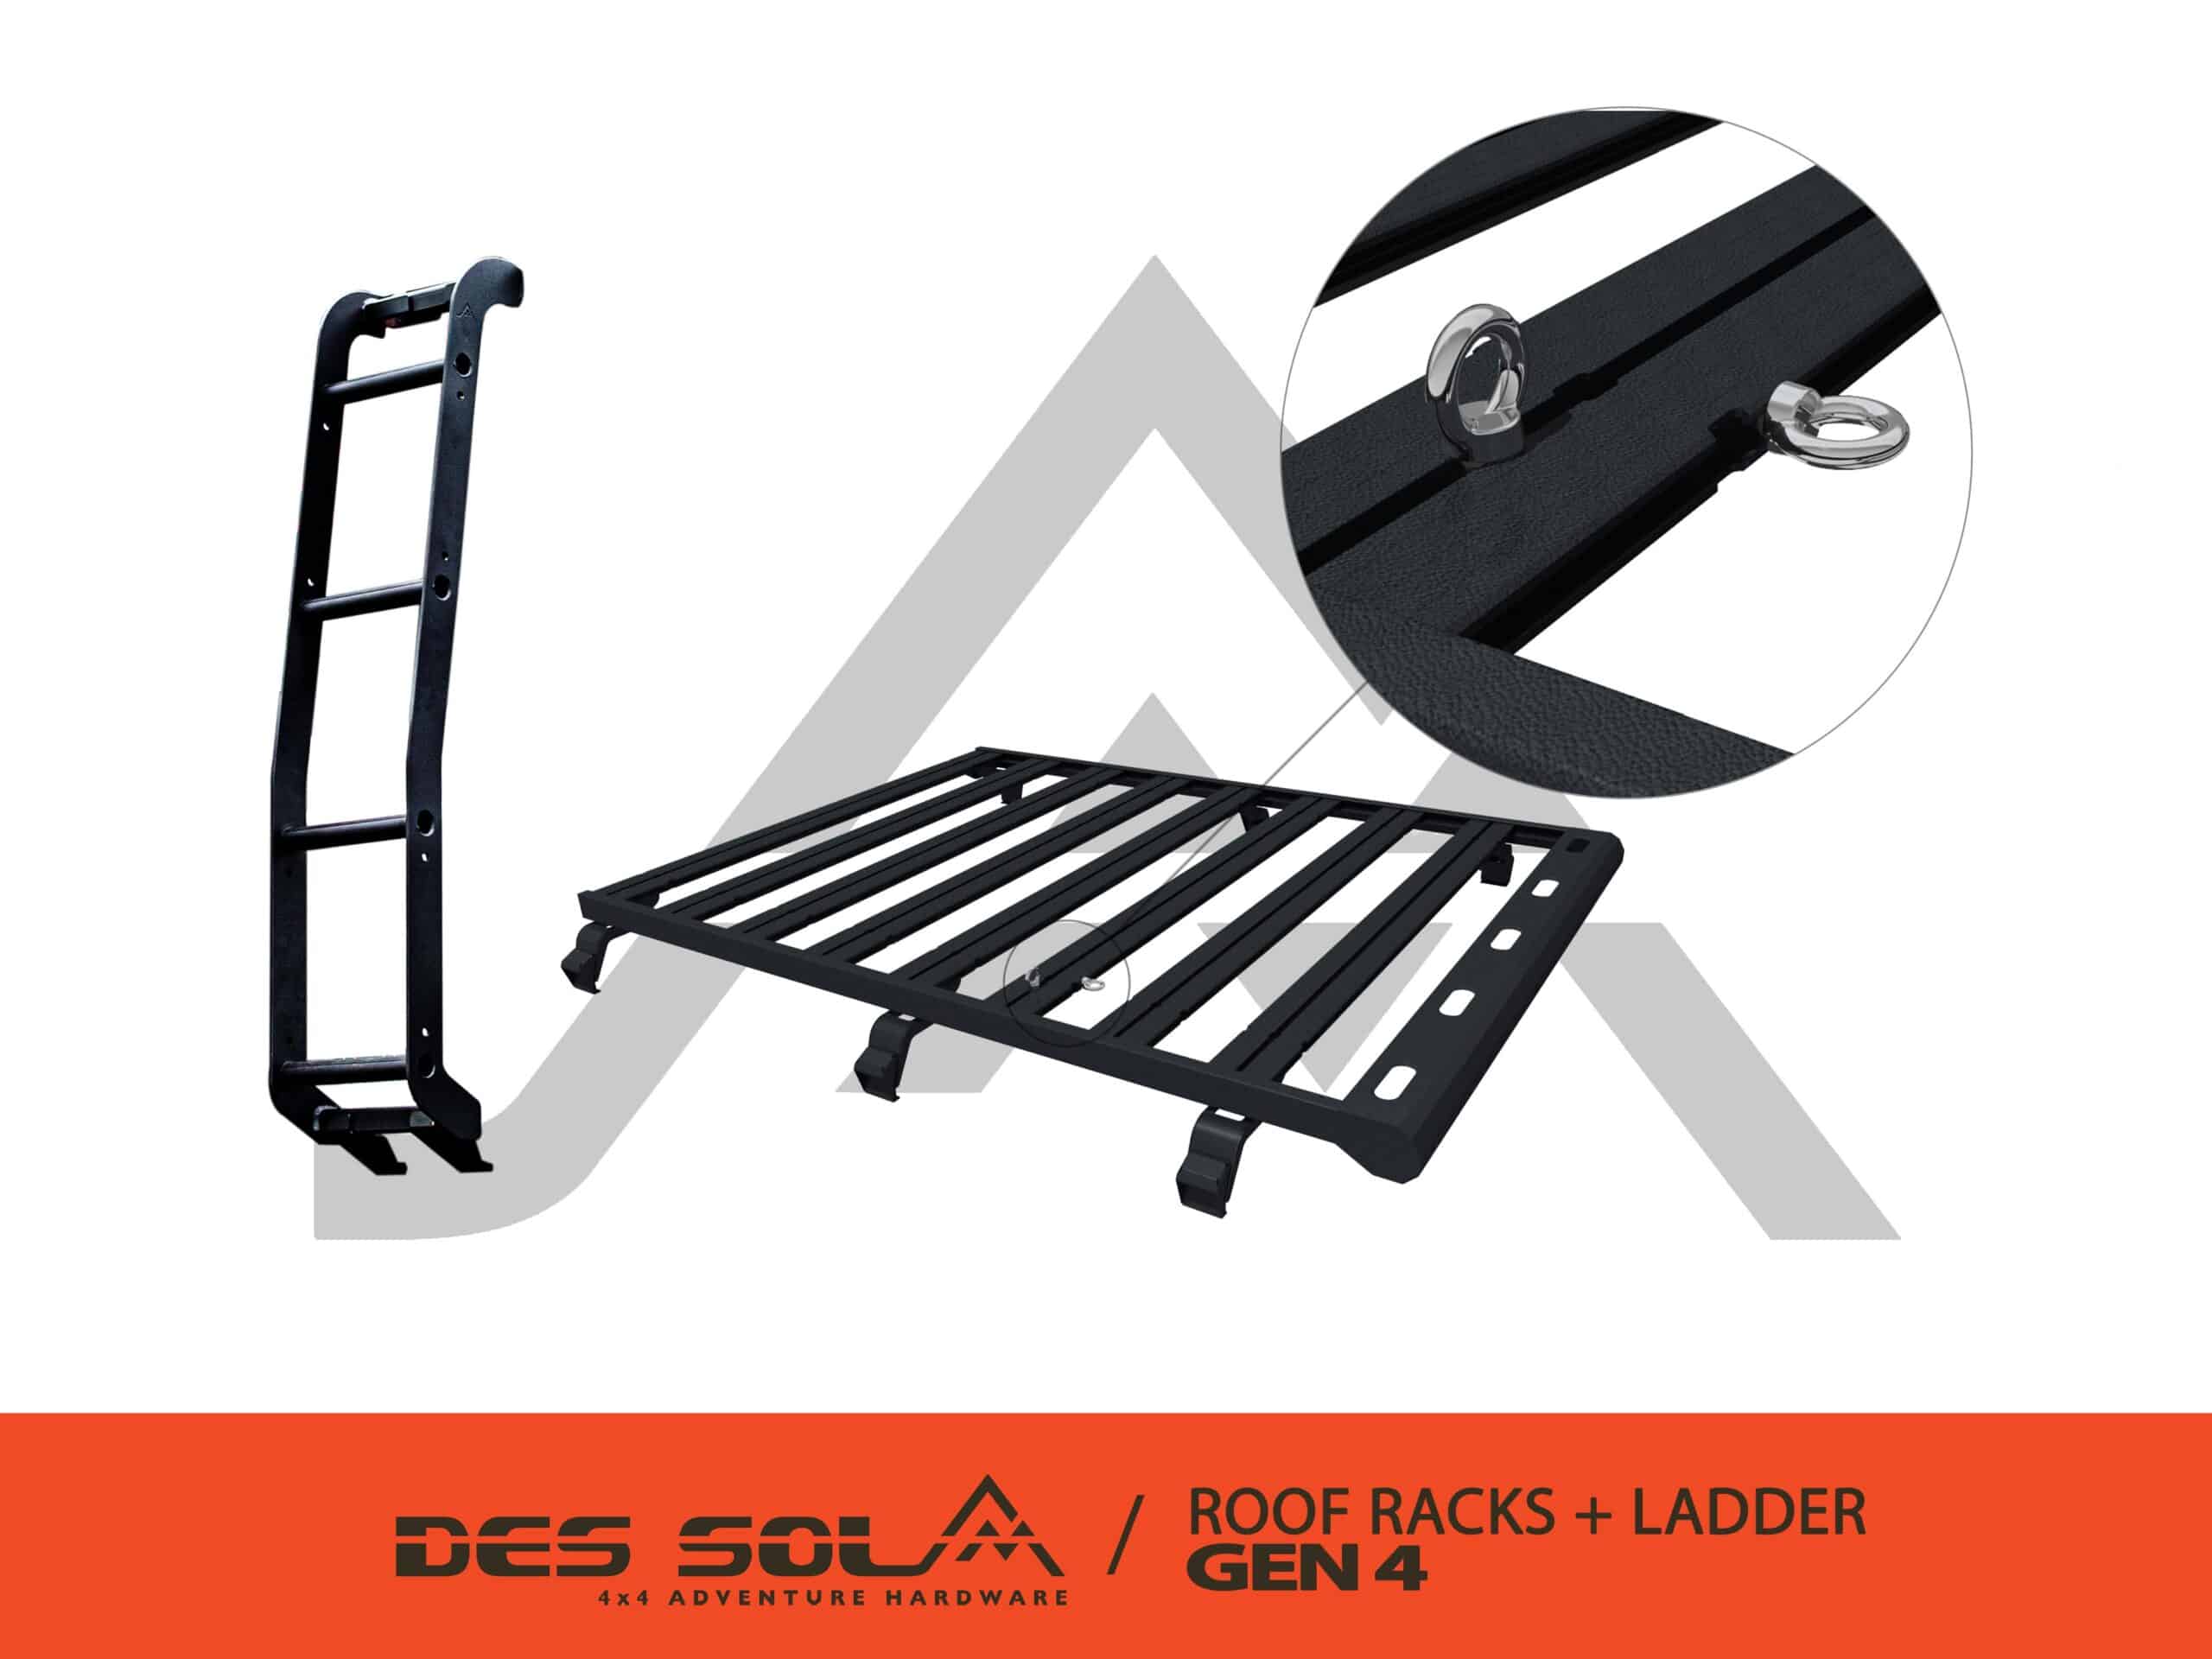 Rack-Tech Roof Rack and Ladder Combo for Suzuki Jimny Gen 4 by Des Sol